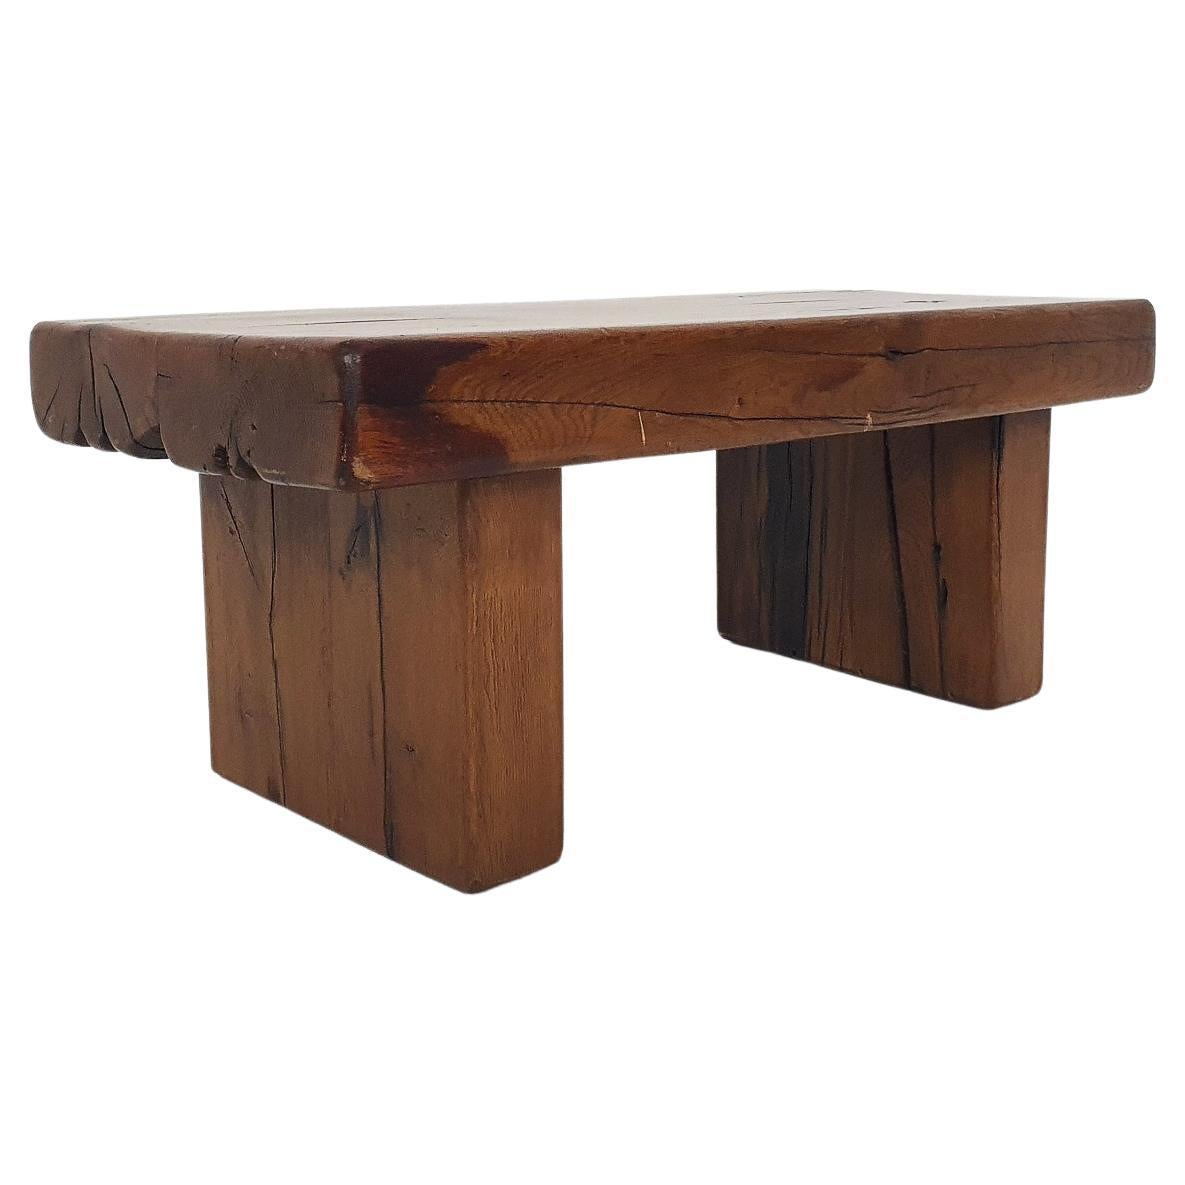 Heavy solid oak side table or bench in the style of Charlotte Perriand.
Wabisabi style.